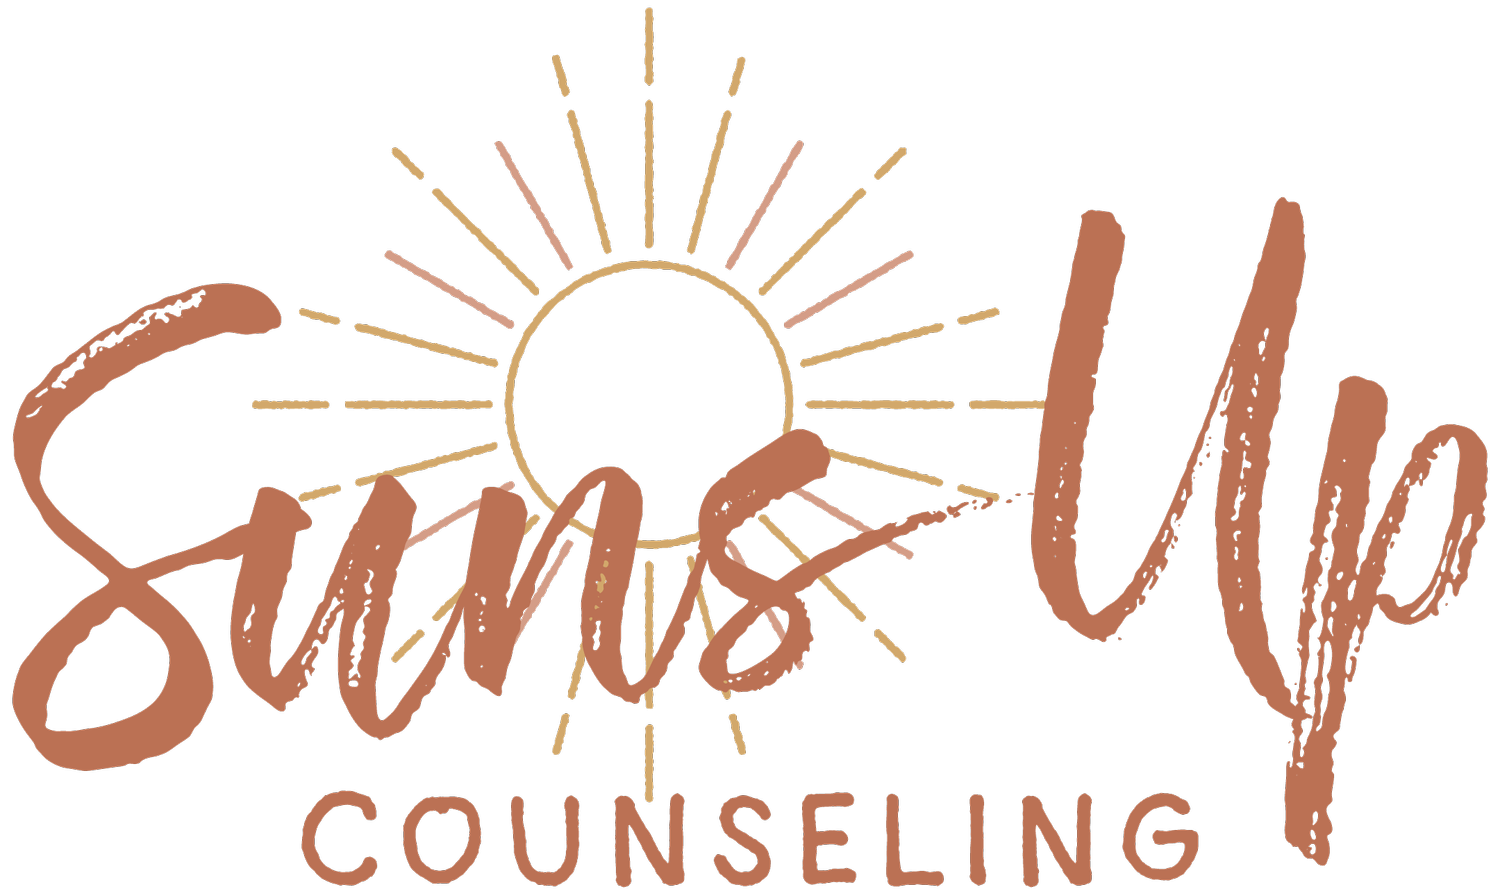 Suns Up Counseling Center&mdash;Transformative Counseling in Coastal Georgia